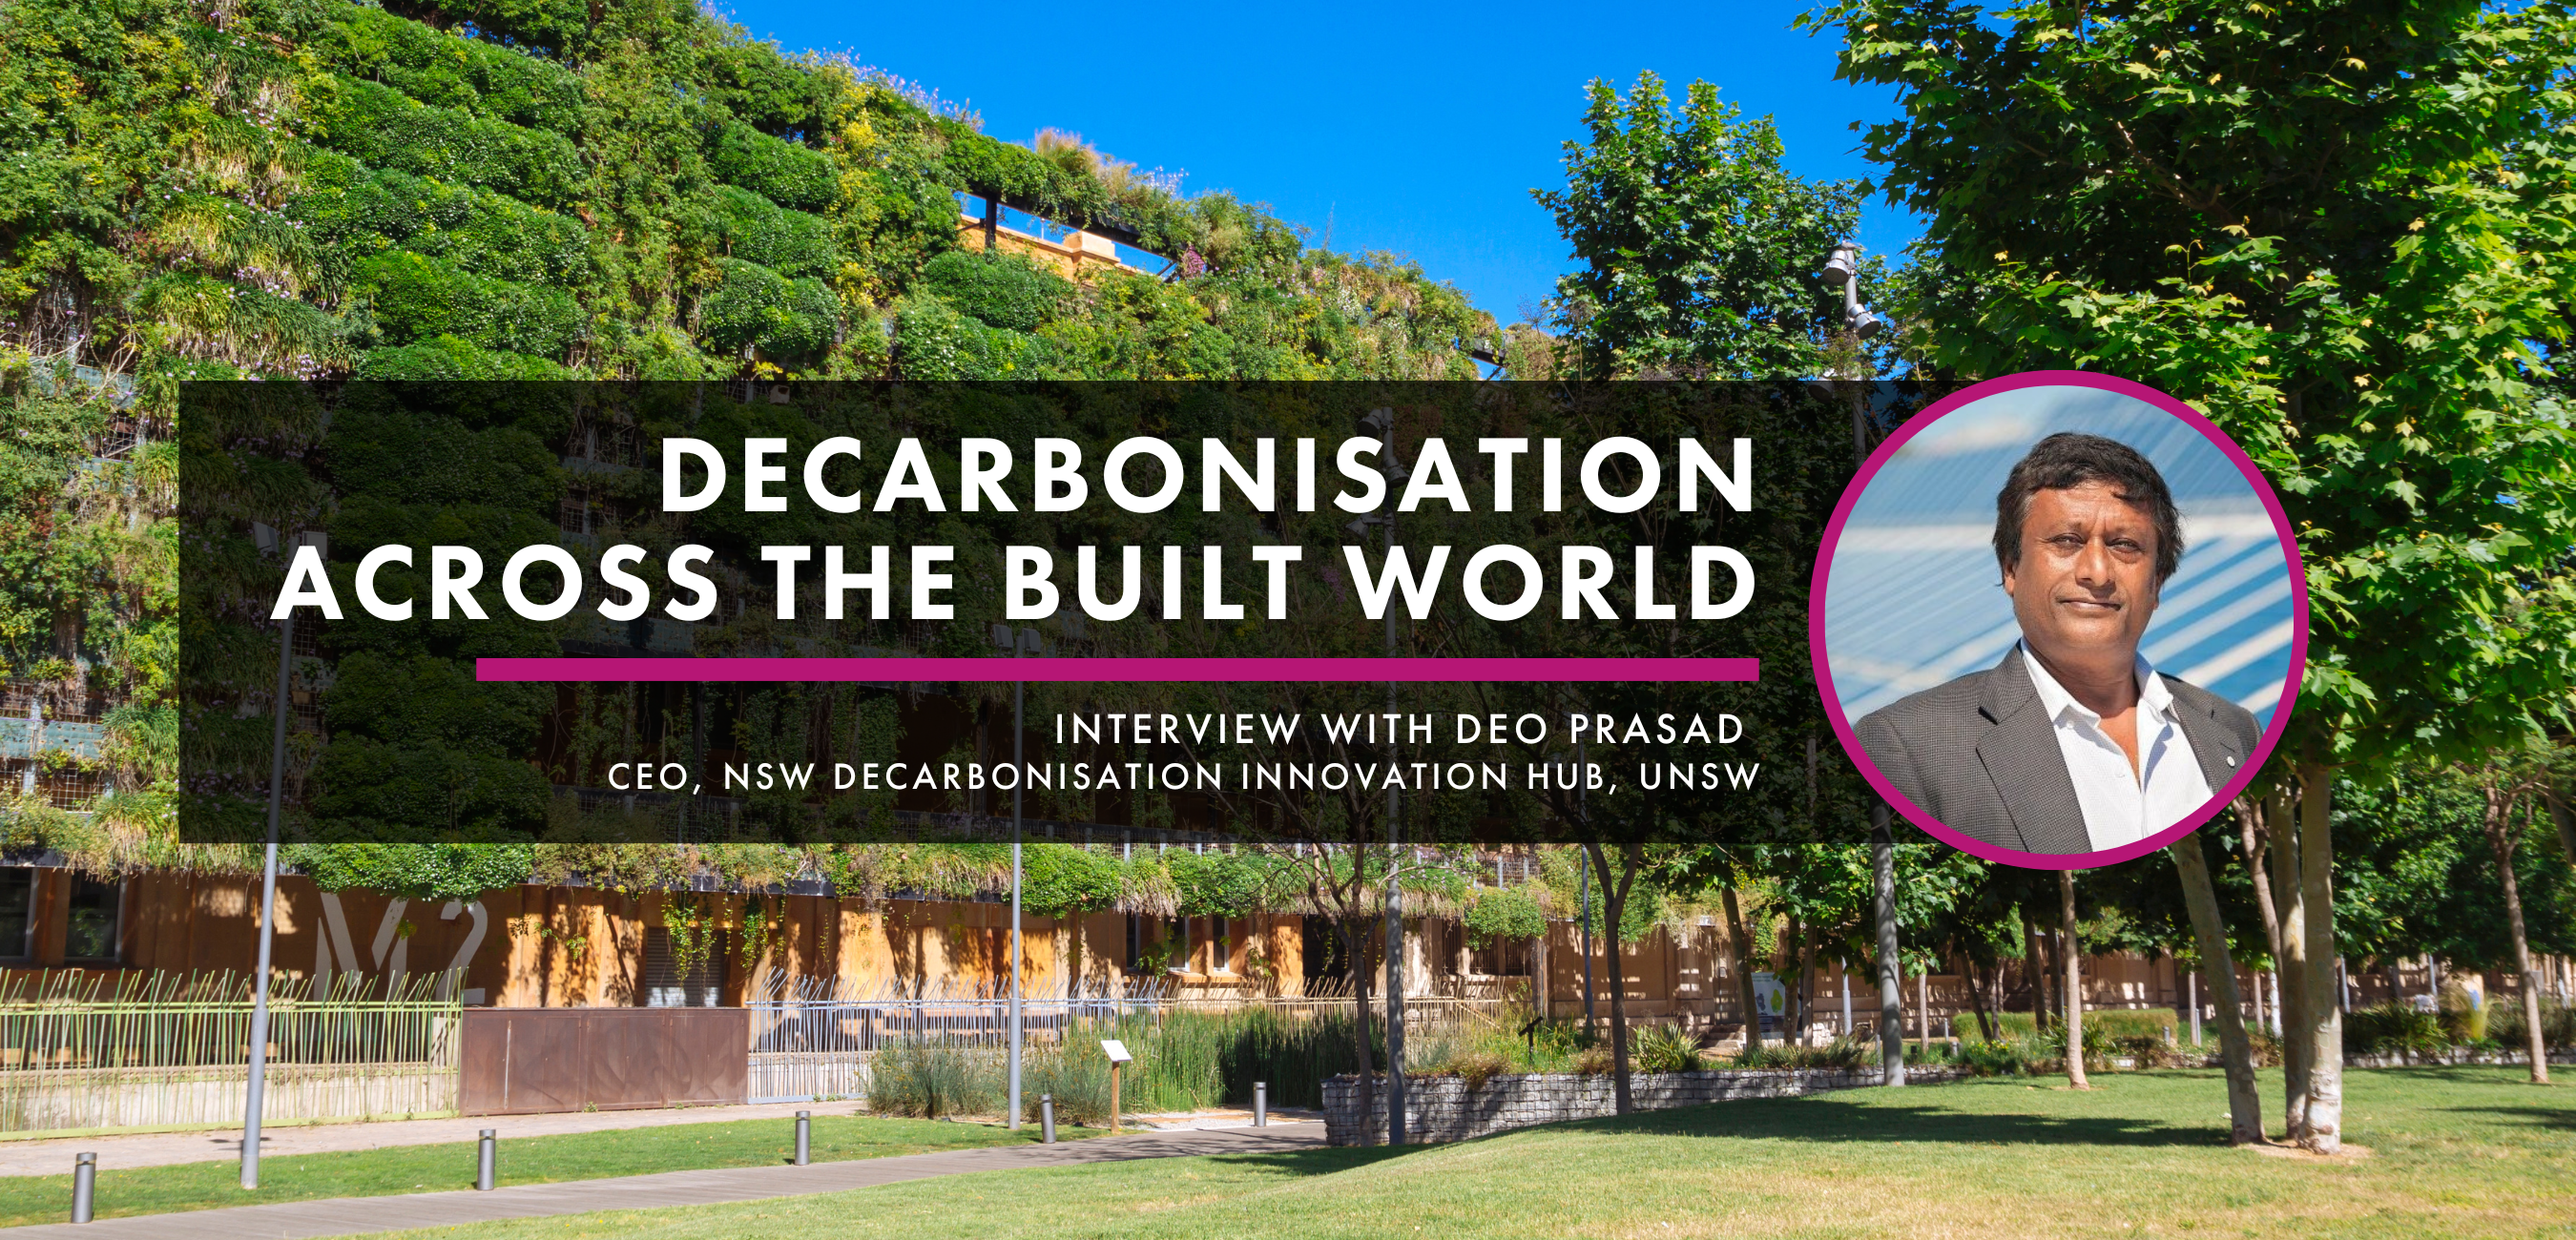 Decarbonisation across the Built World